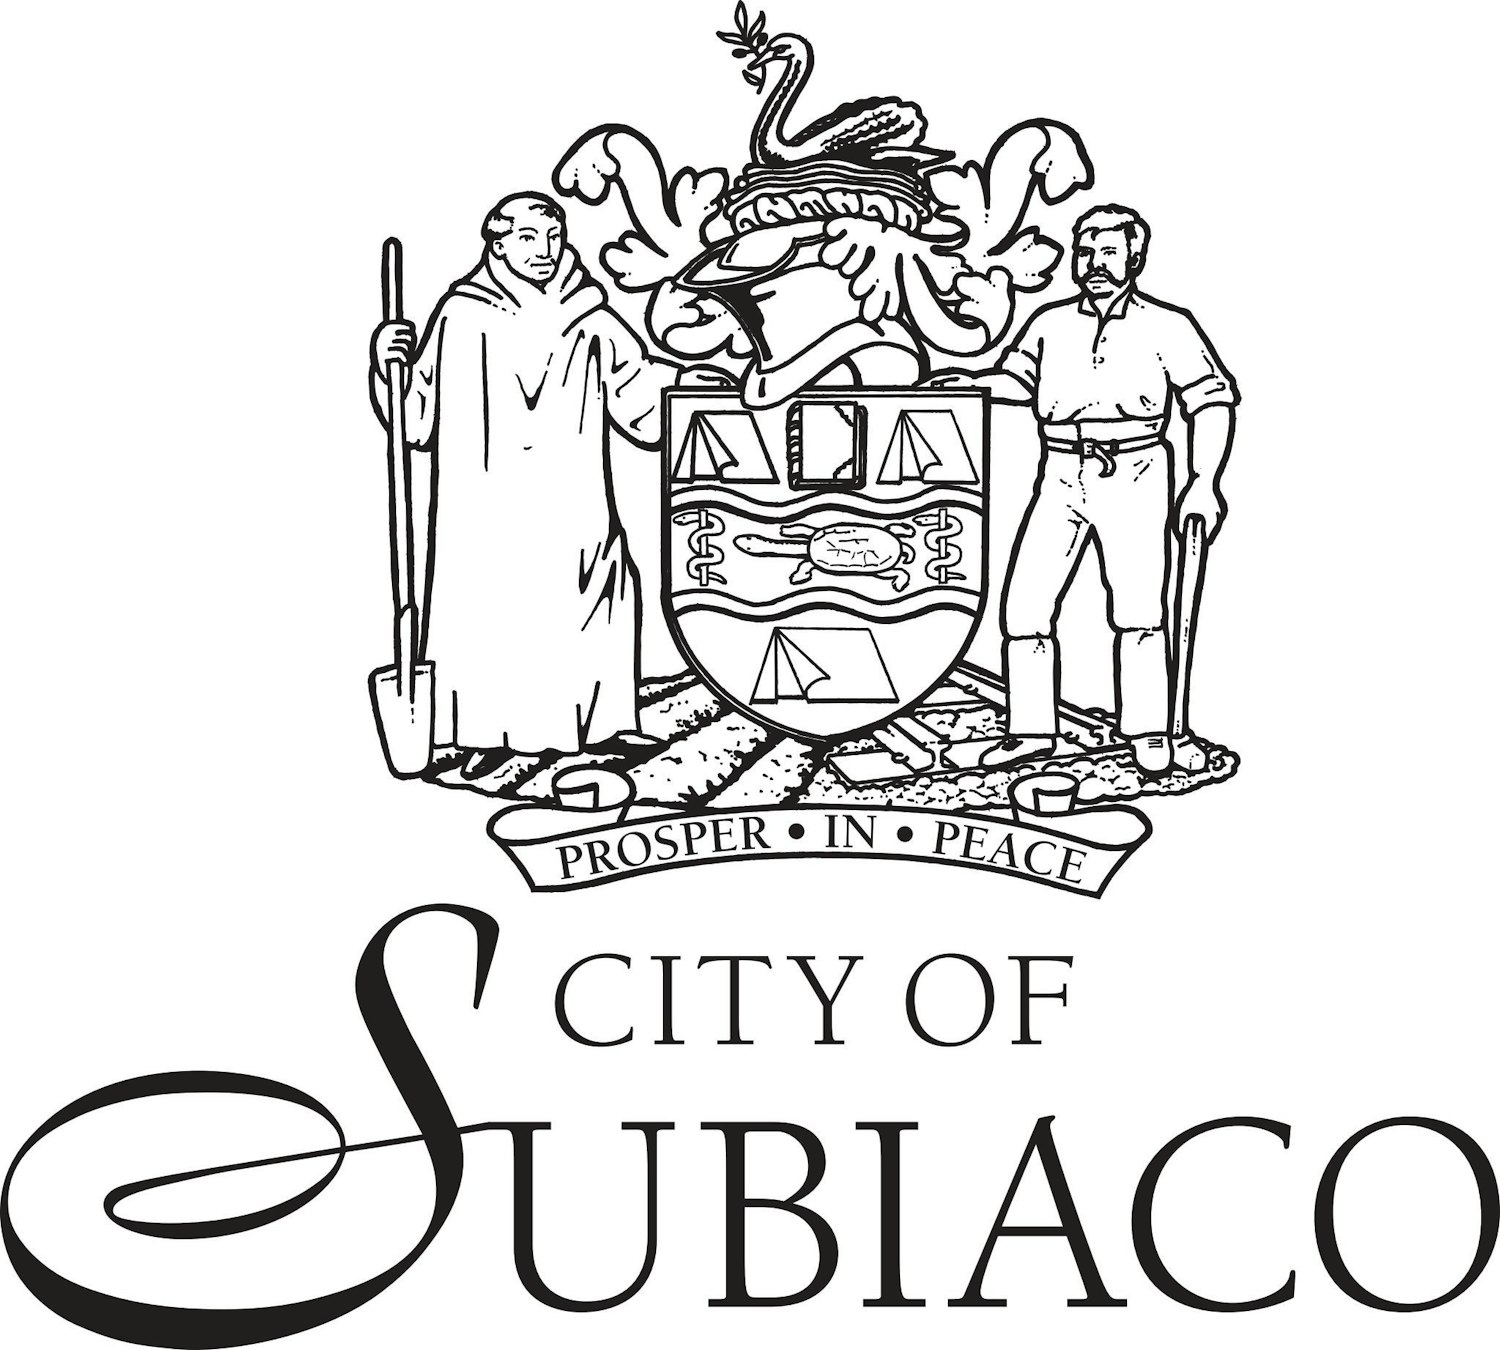 Have your say Subiaco